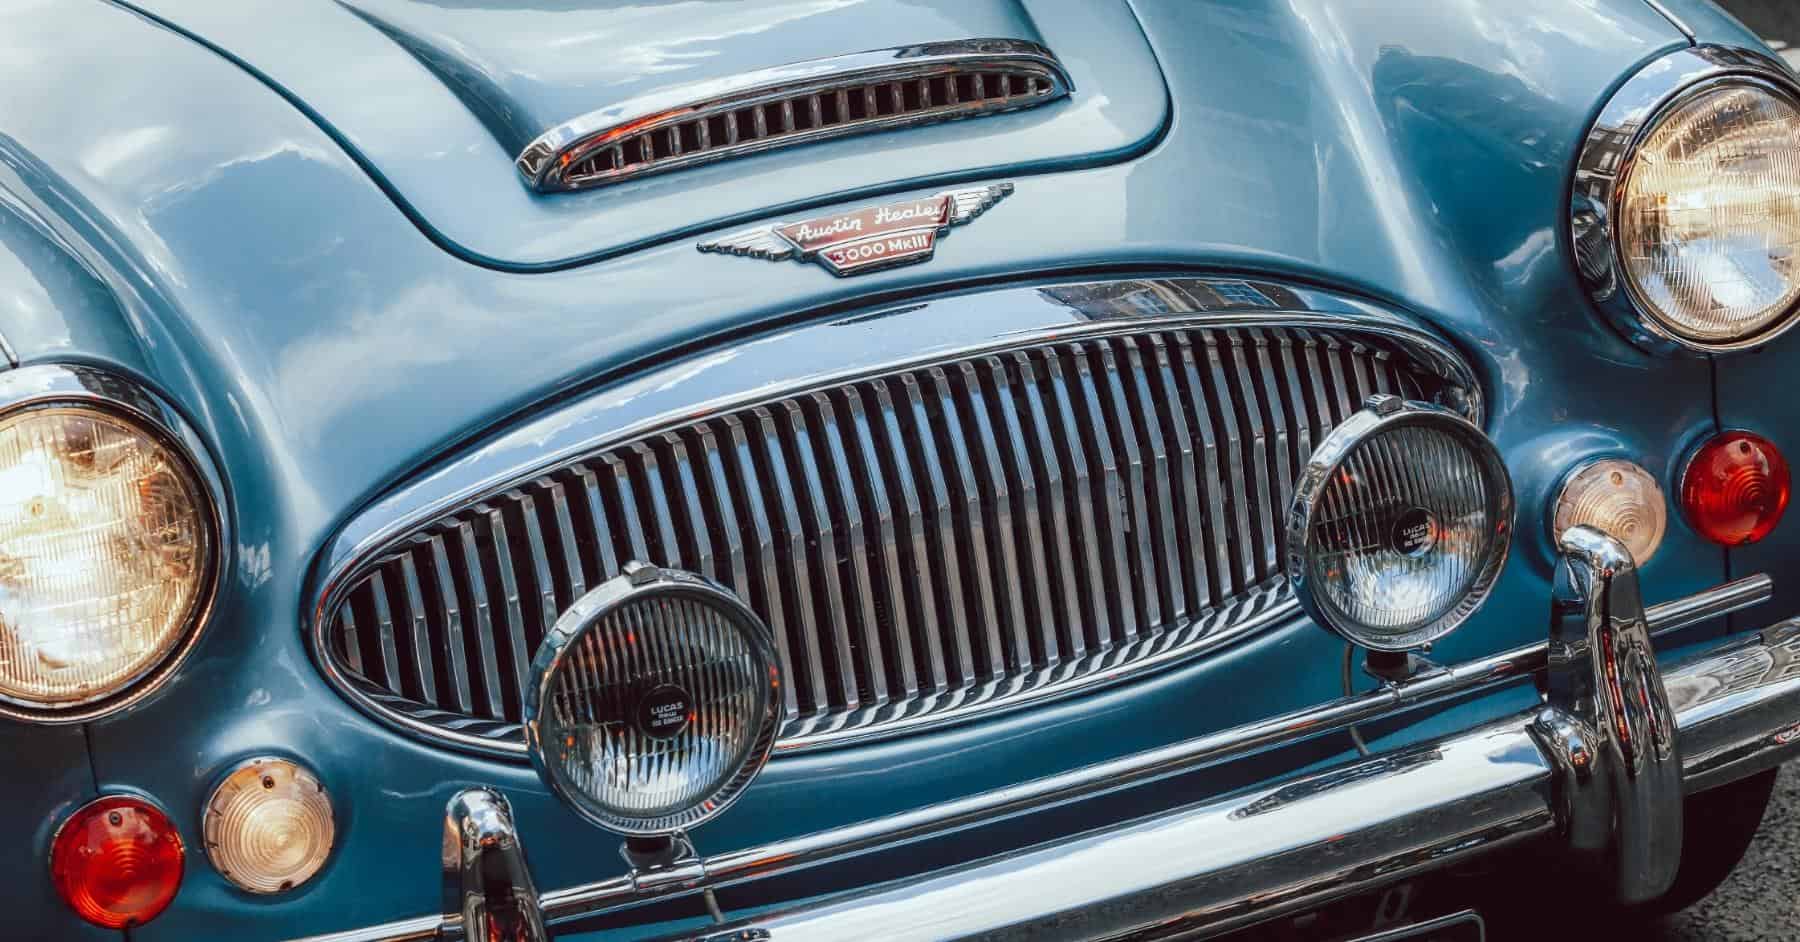 How To Make A Classic Car Electric